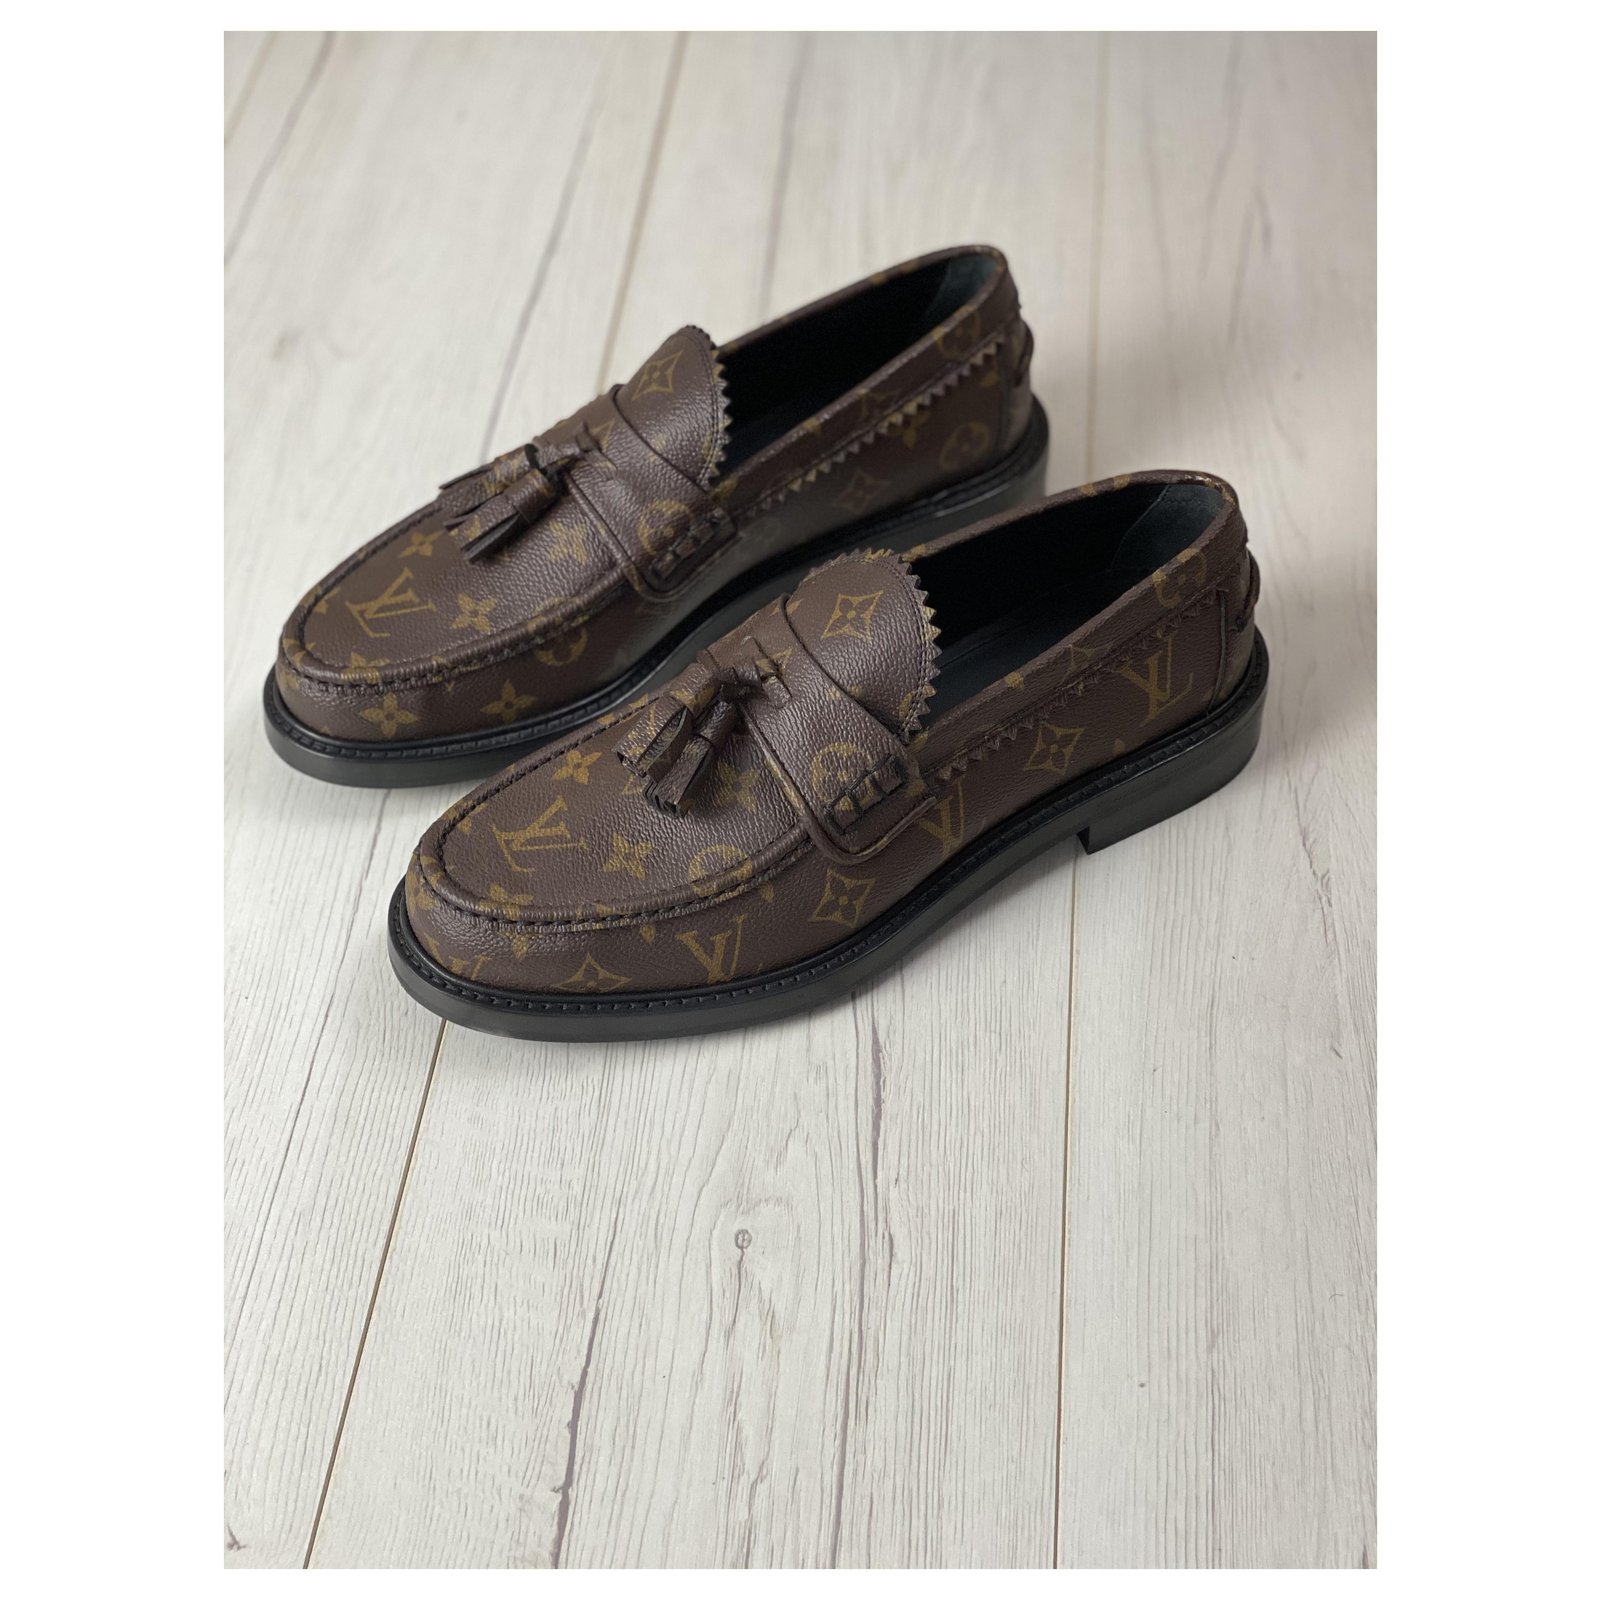 LOUIS VUITTON SHOES LOAFERS WITH BUCKLE 8 42 SUEDE MONOGRAM LOAFERS Brown  ref.491408 - Joli Closet